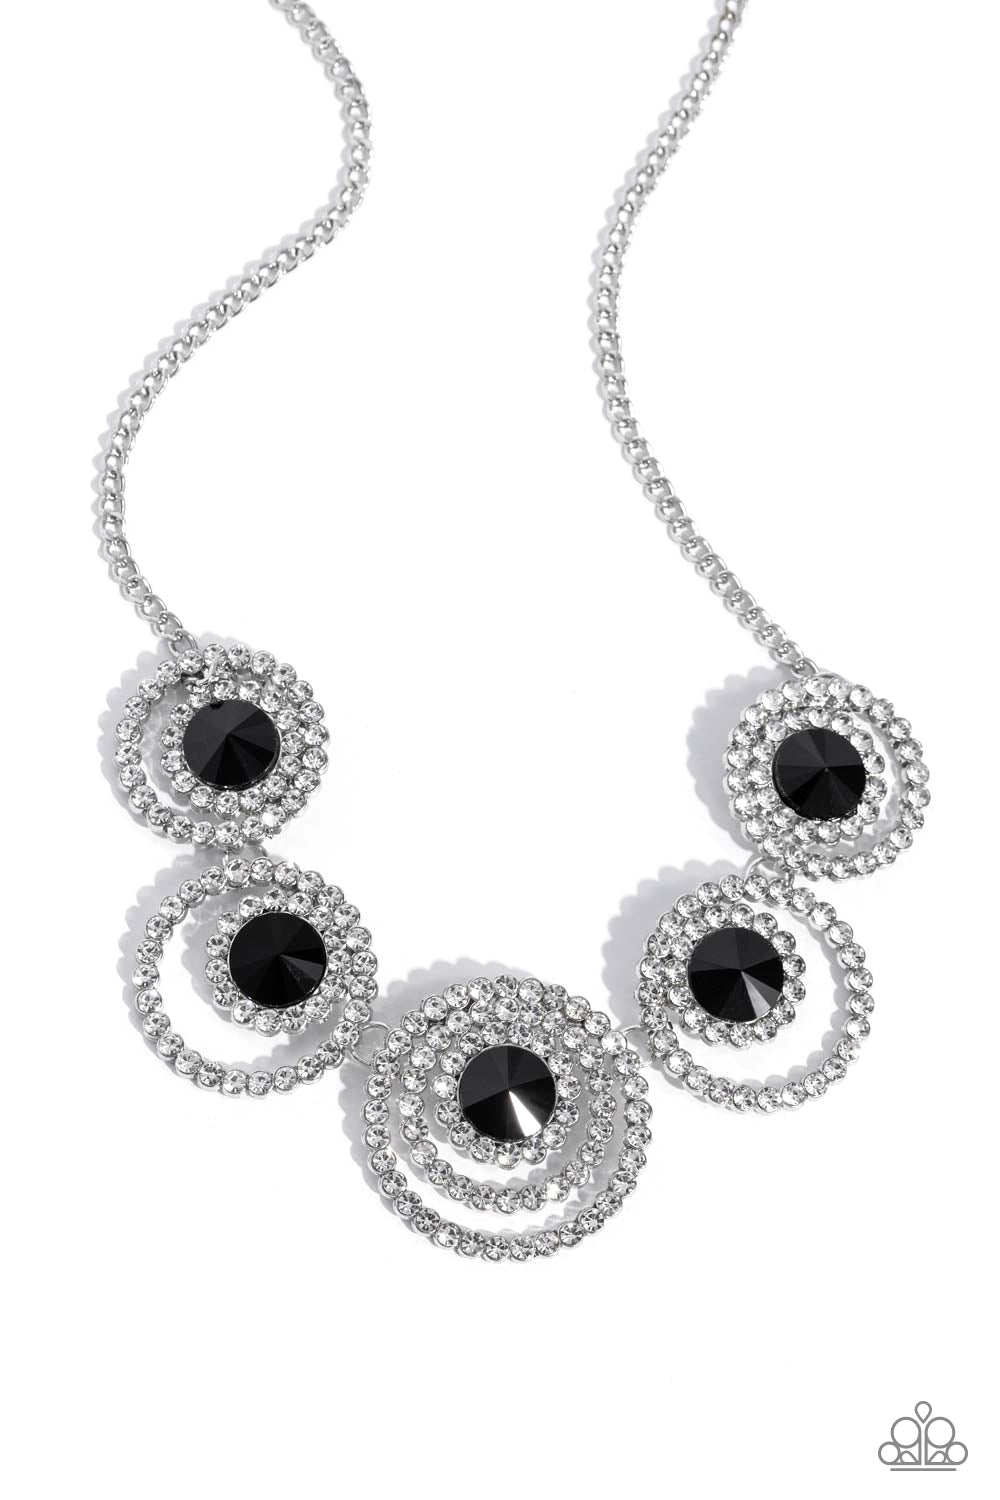 Dramatic Darling Black Necklace - Paparazzi Accessories  Encrusted in glassy white rhinestones, layered silver frames delicately connect below the collar for a statement-making finish. Featured in the center of the effervescent rings, faceted black beads come to a point for a dramatic touch of color along the neckline. Features an adjustable clasp closure.  Sold as one individual necklace. Includes one pair of matching earrings.  SKU: P2RE-BKXX-470XX